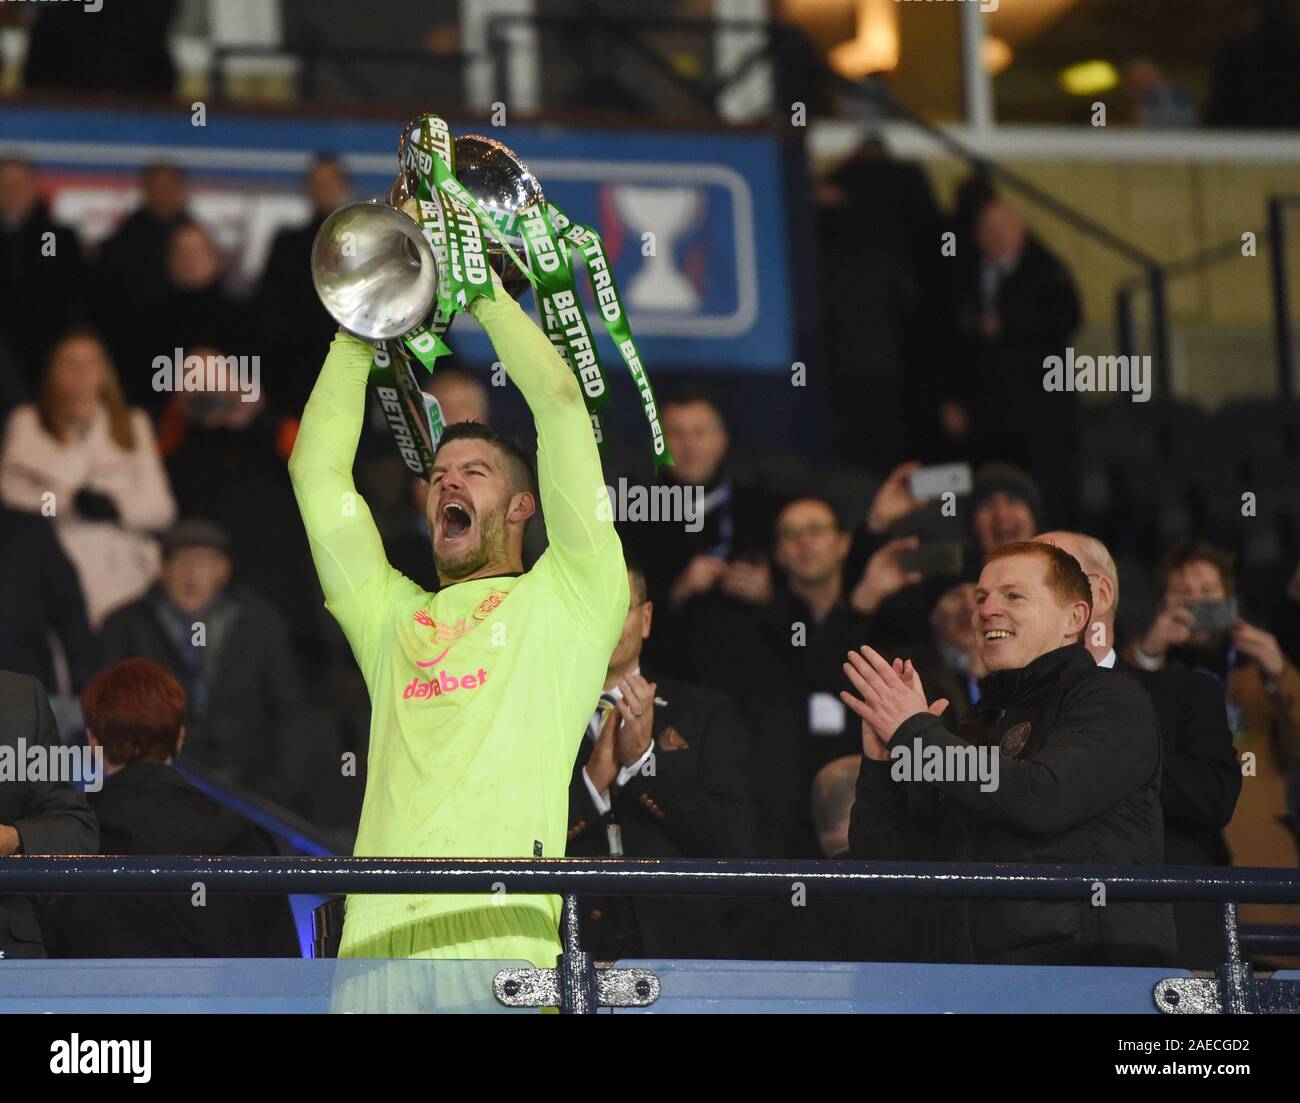 Hampden Park, Glasgow. Scotland.UK.8th Dec 2019. Rangers vs Celtic. Betfred, Scottish League Cup Final.   Celtic Hero keeper Fraser Forster (Penalty save) with trophy as manager   Neil Lennon looks on. Credit: eric mccowat/Alamy Live News Stock Photo